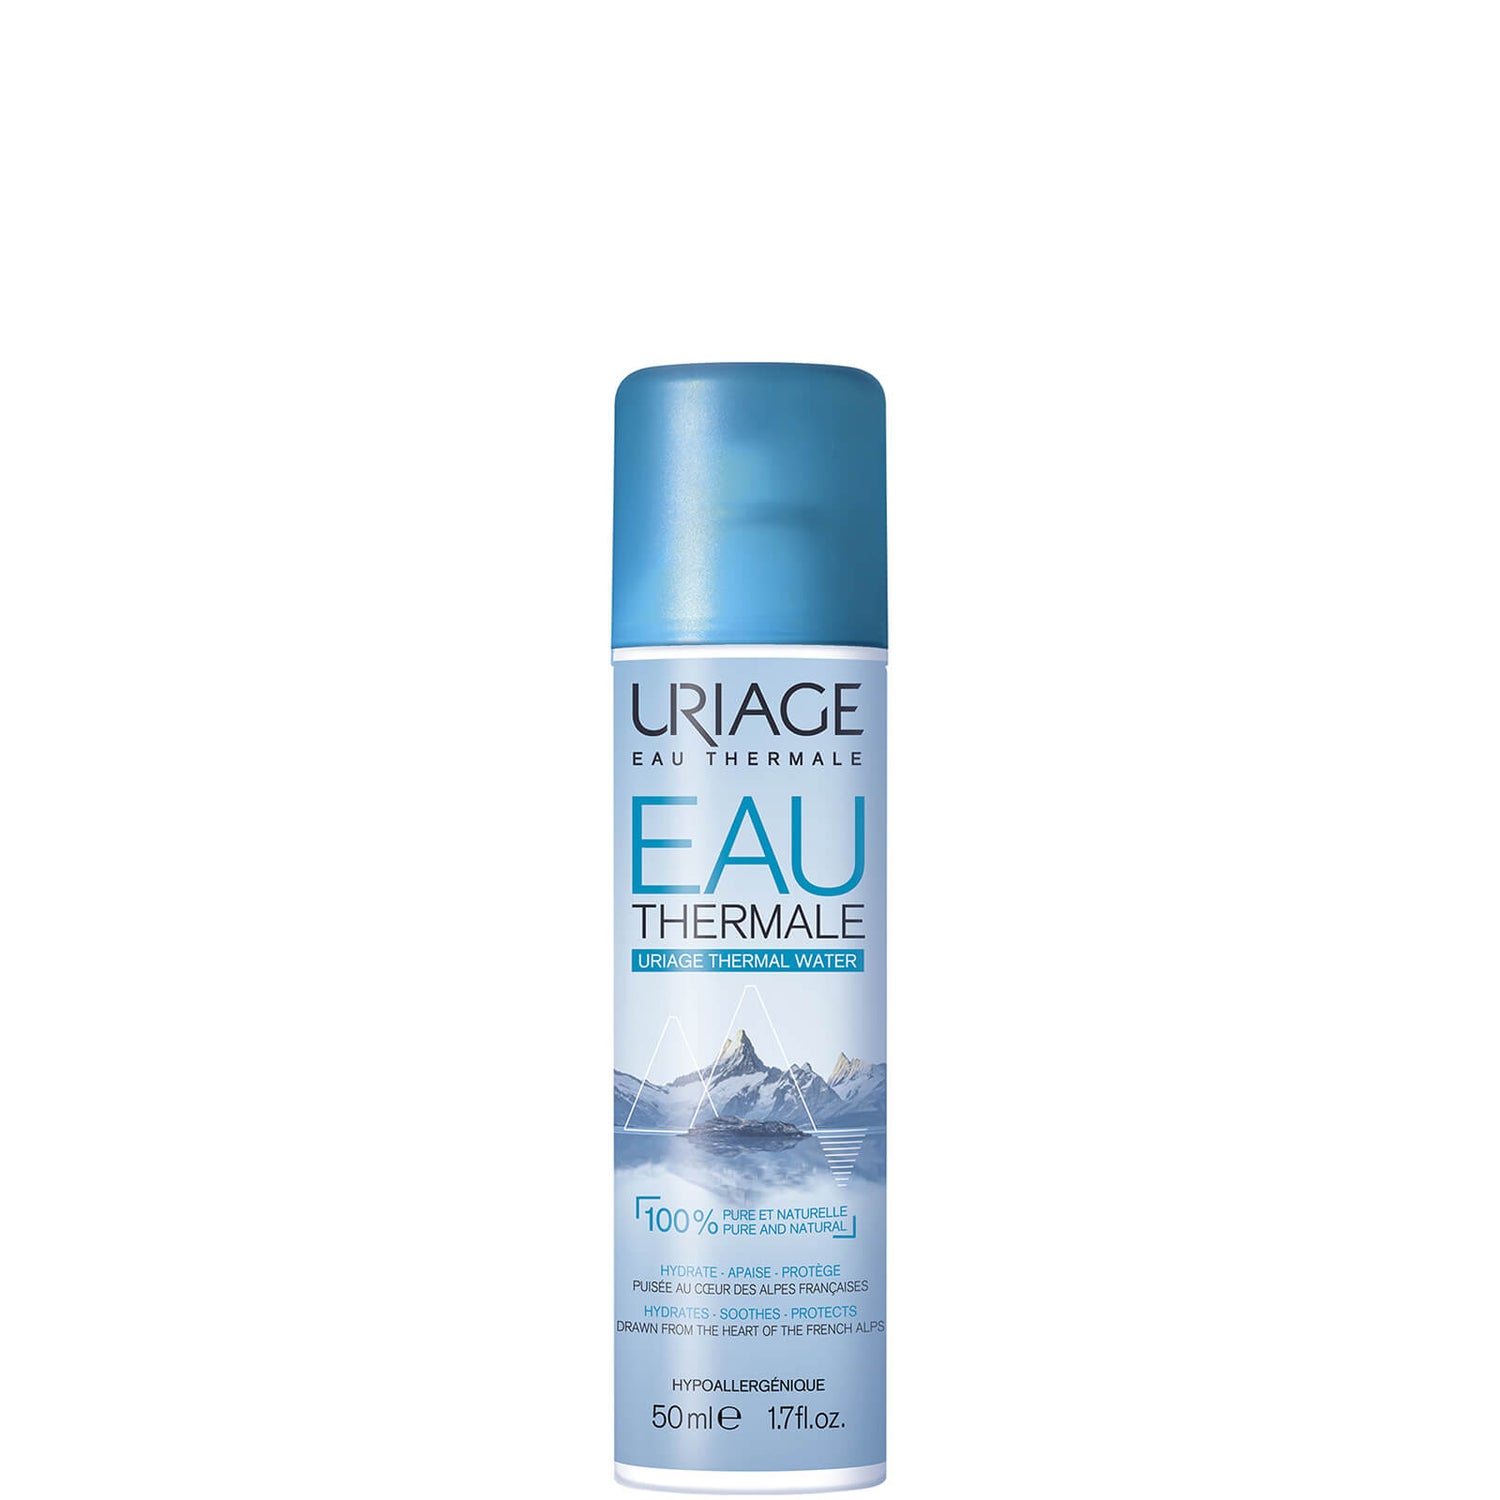 Uriage Eau Thermale Pure Thermalwasser (50 ml)